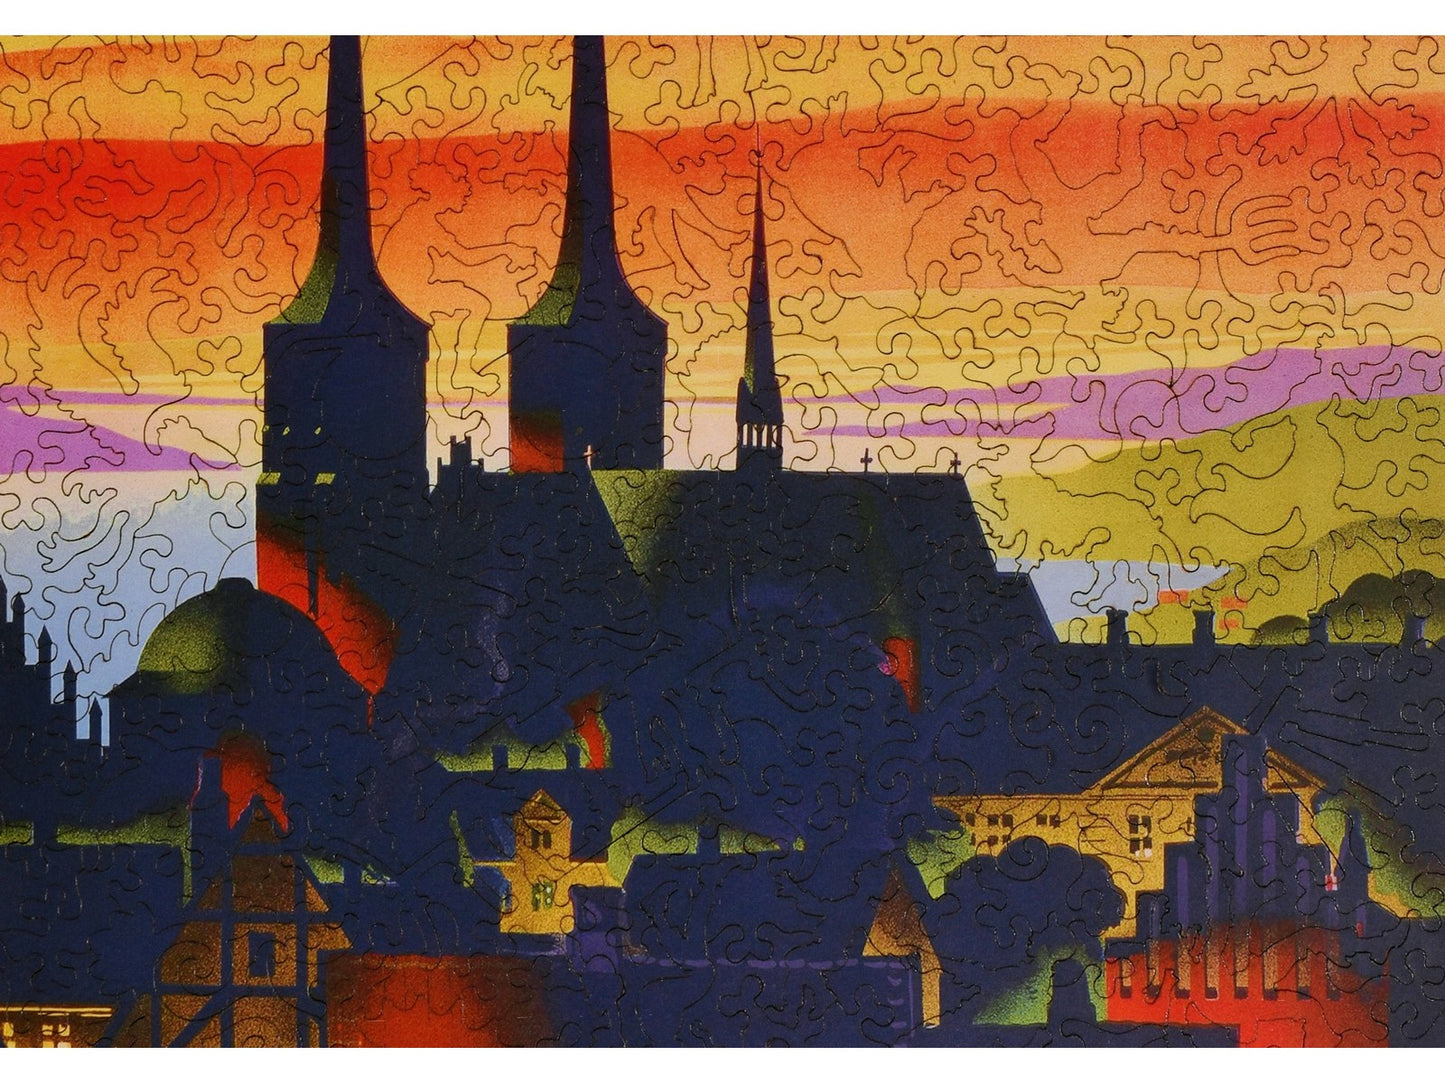 A closeup of the front of the puzzle, Denmark Land of Colour, showing the detail in the pieces.